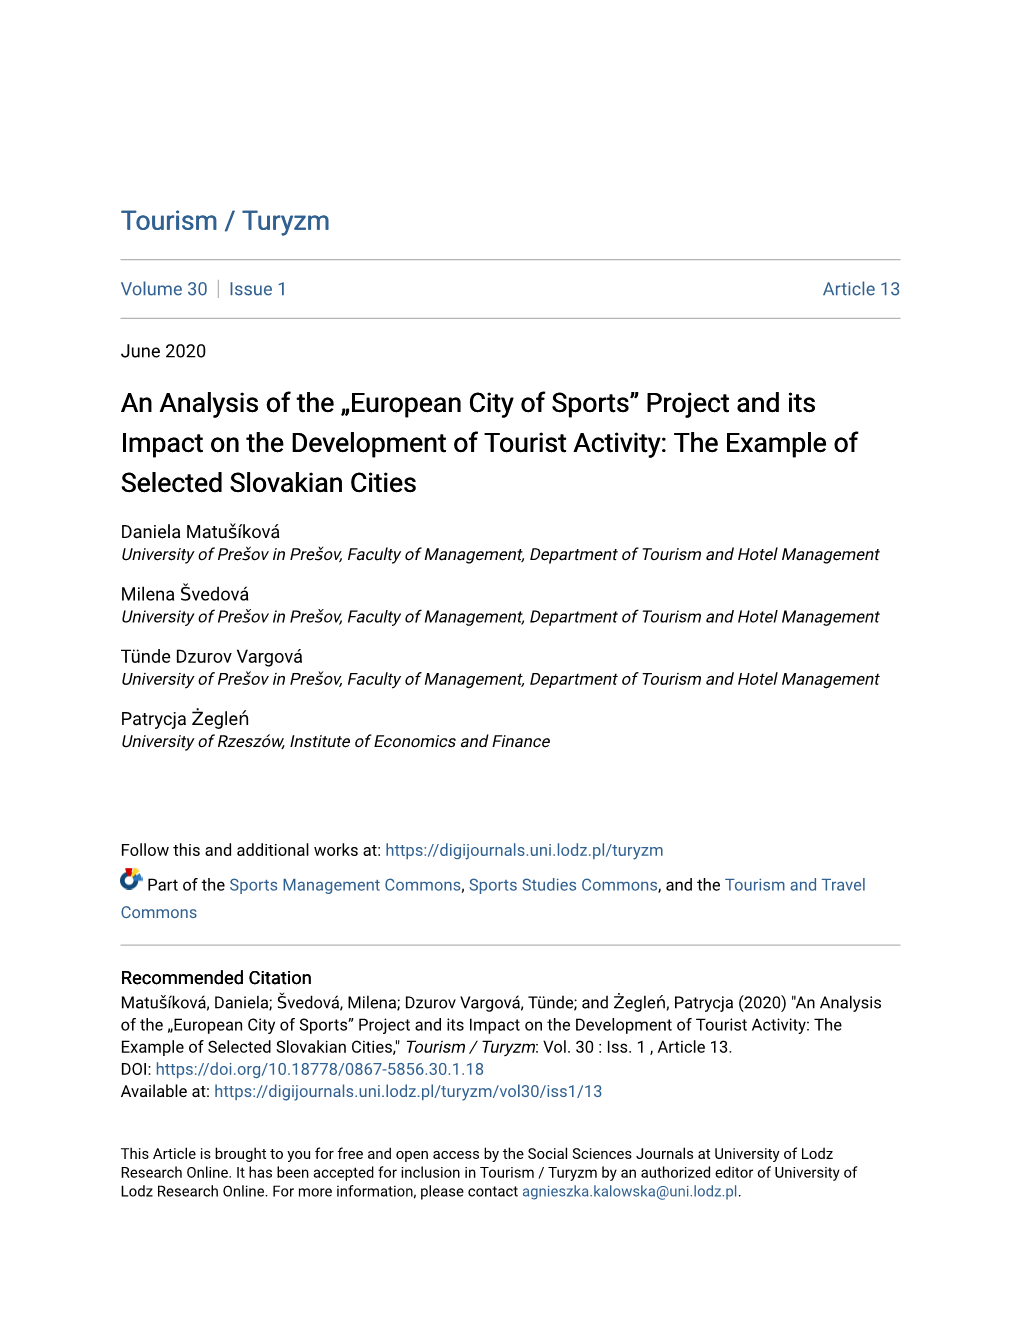 European City of Sports” Project and Its Impact on the Development of Tourist Activity: the Example of Selected Slovakian Cities